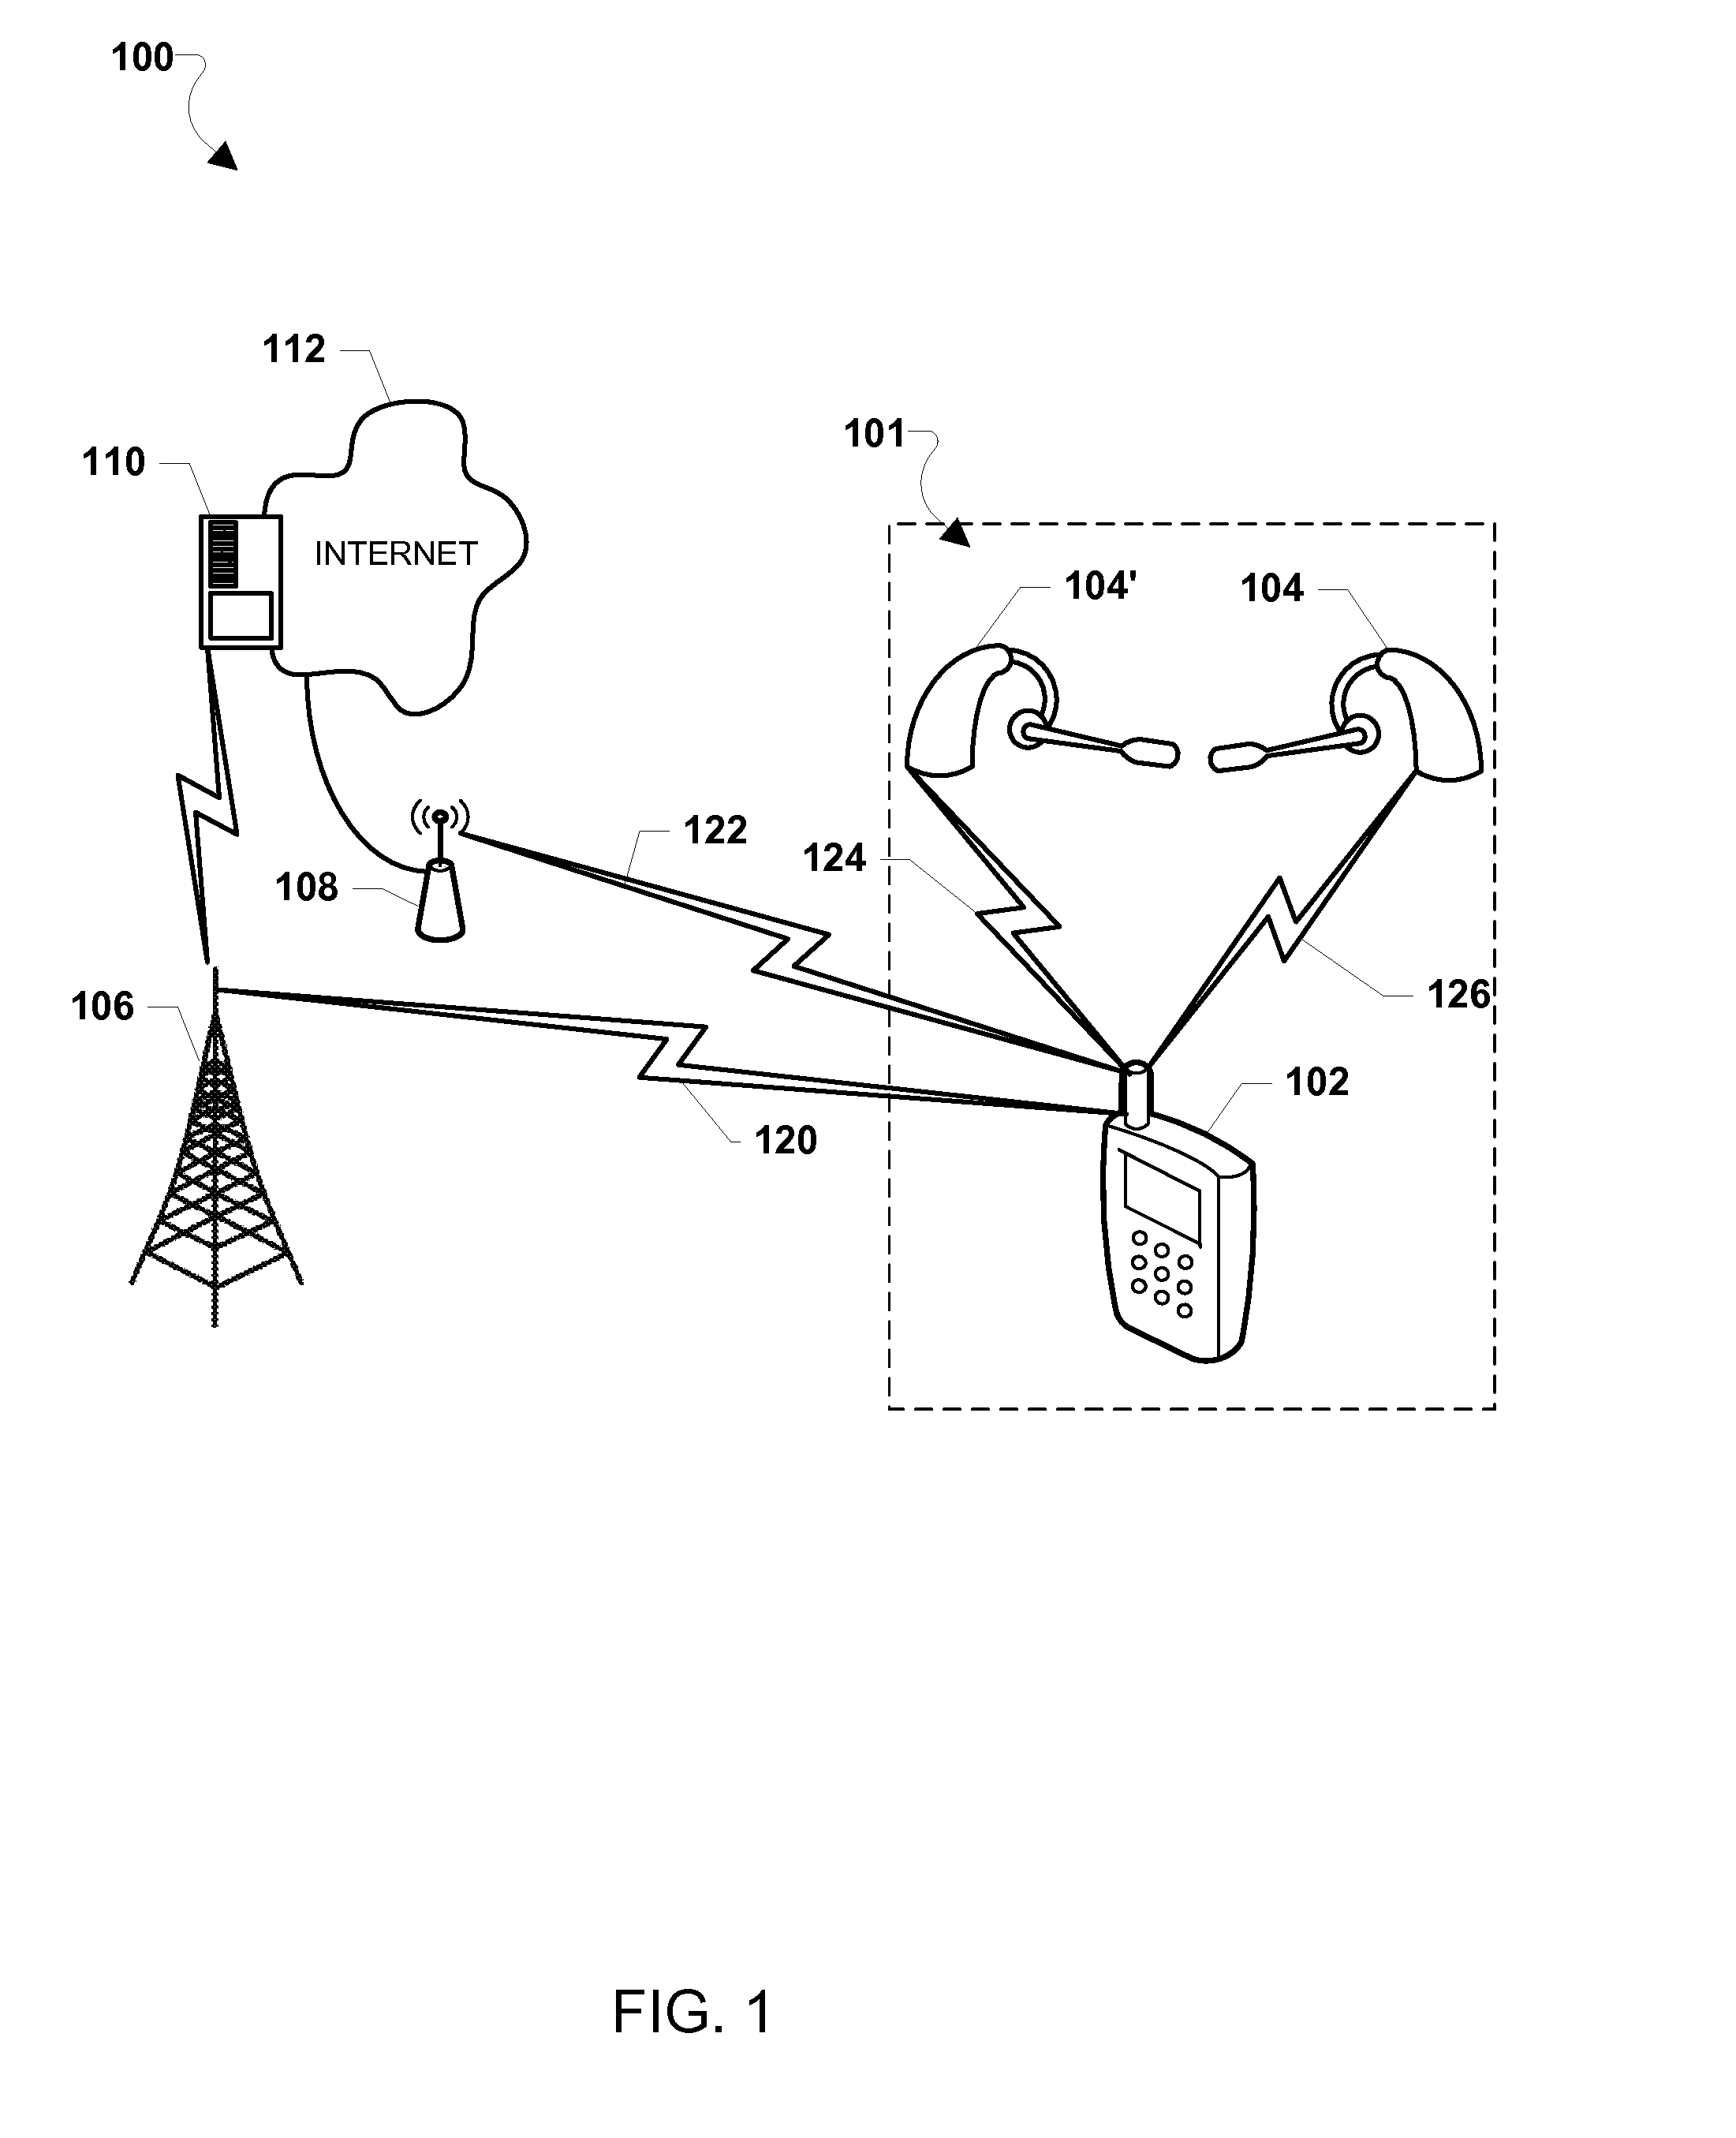 Systems and methods for managing concurrent audio messages